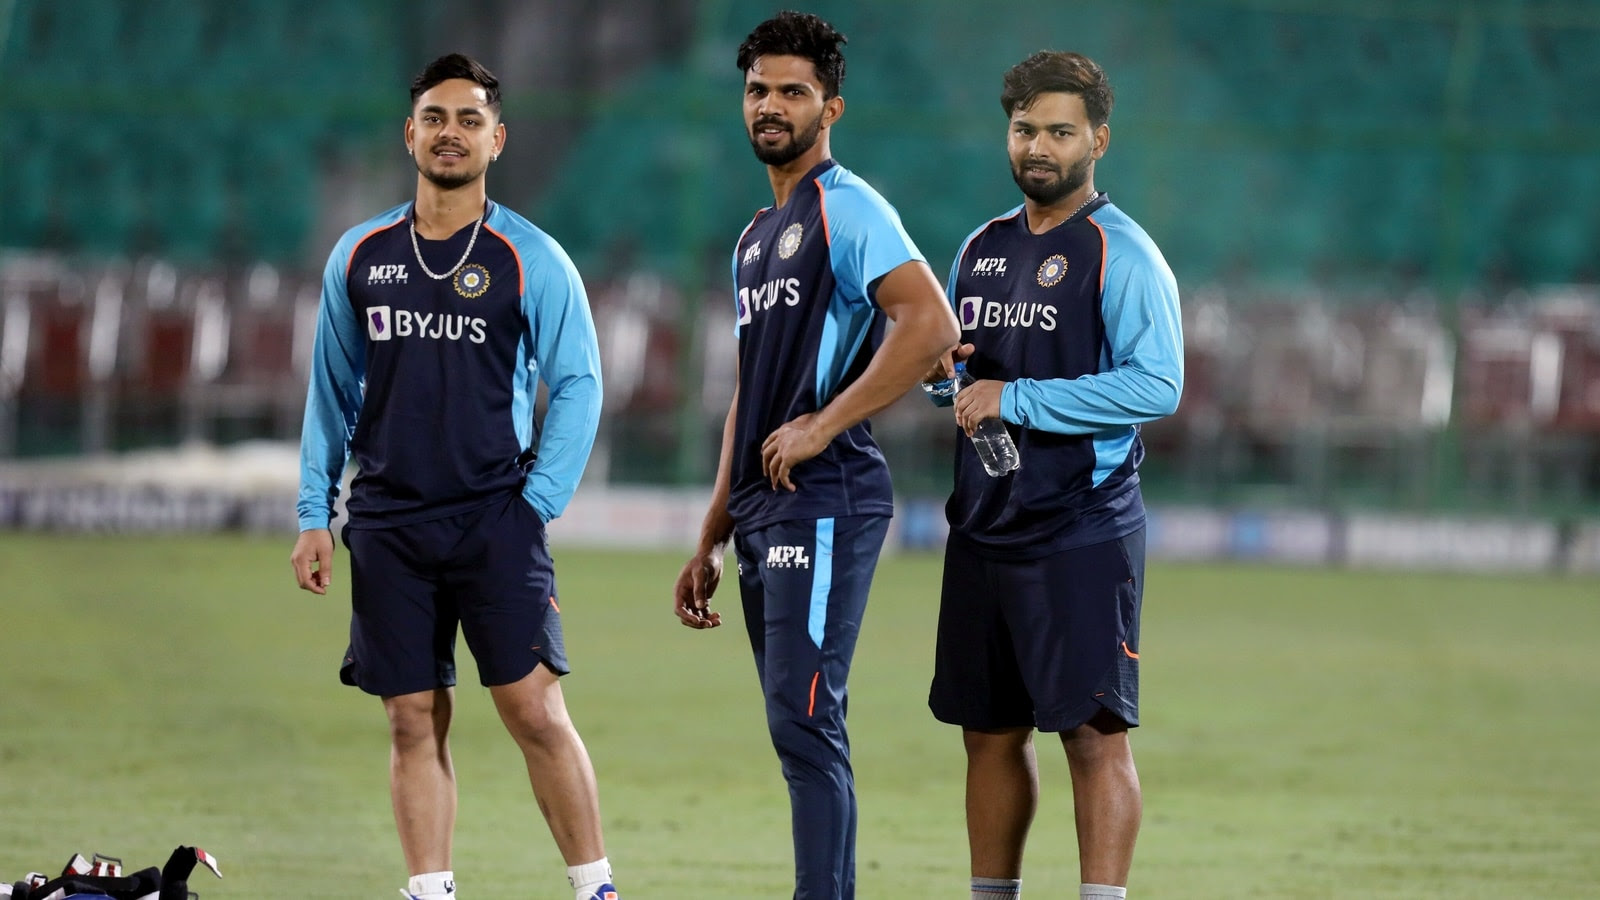 Indian Team for SA T20: BCCI passes DIKTAT, ‘entire Indian squad will have to pass post IPL Fitness test’ to play INDIA vs South Africa T20 Series